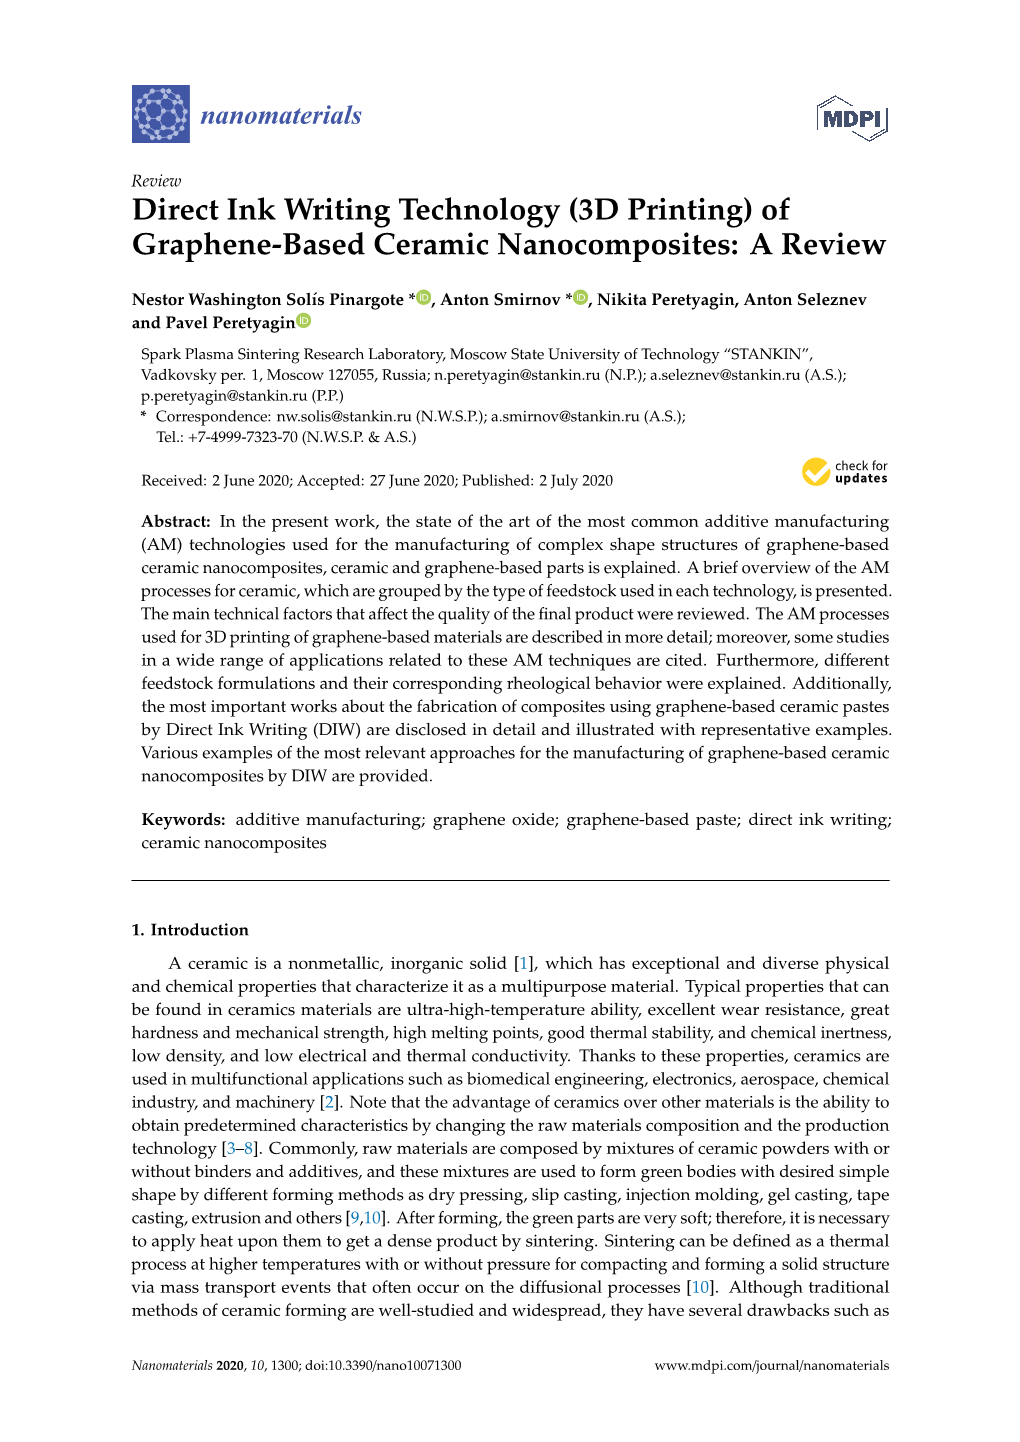 Direct Ink Writing Technology (3D Printing) of Graphene-Based Ceramic Nanocomposites: a Review